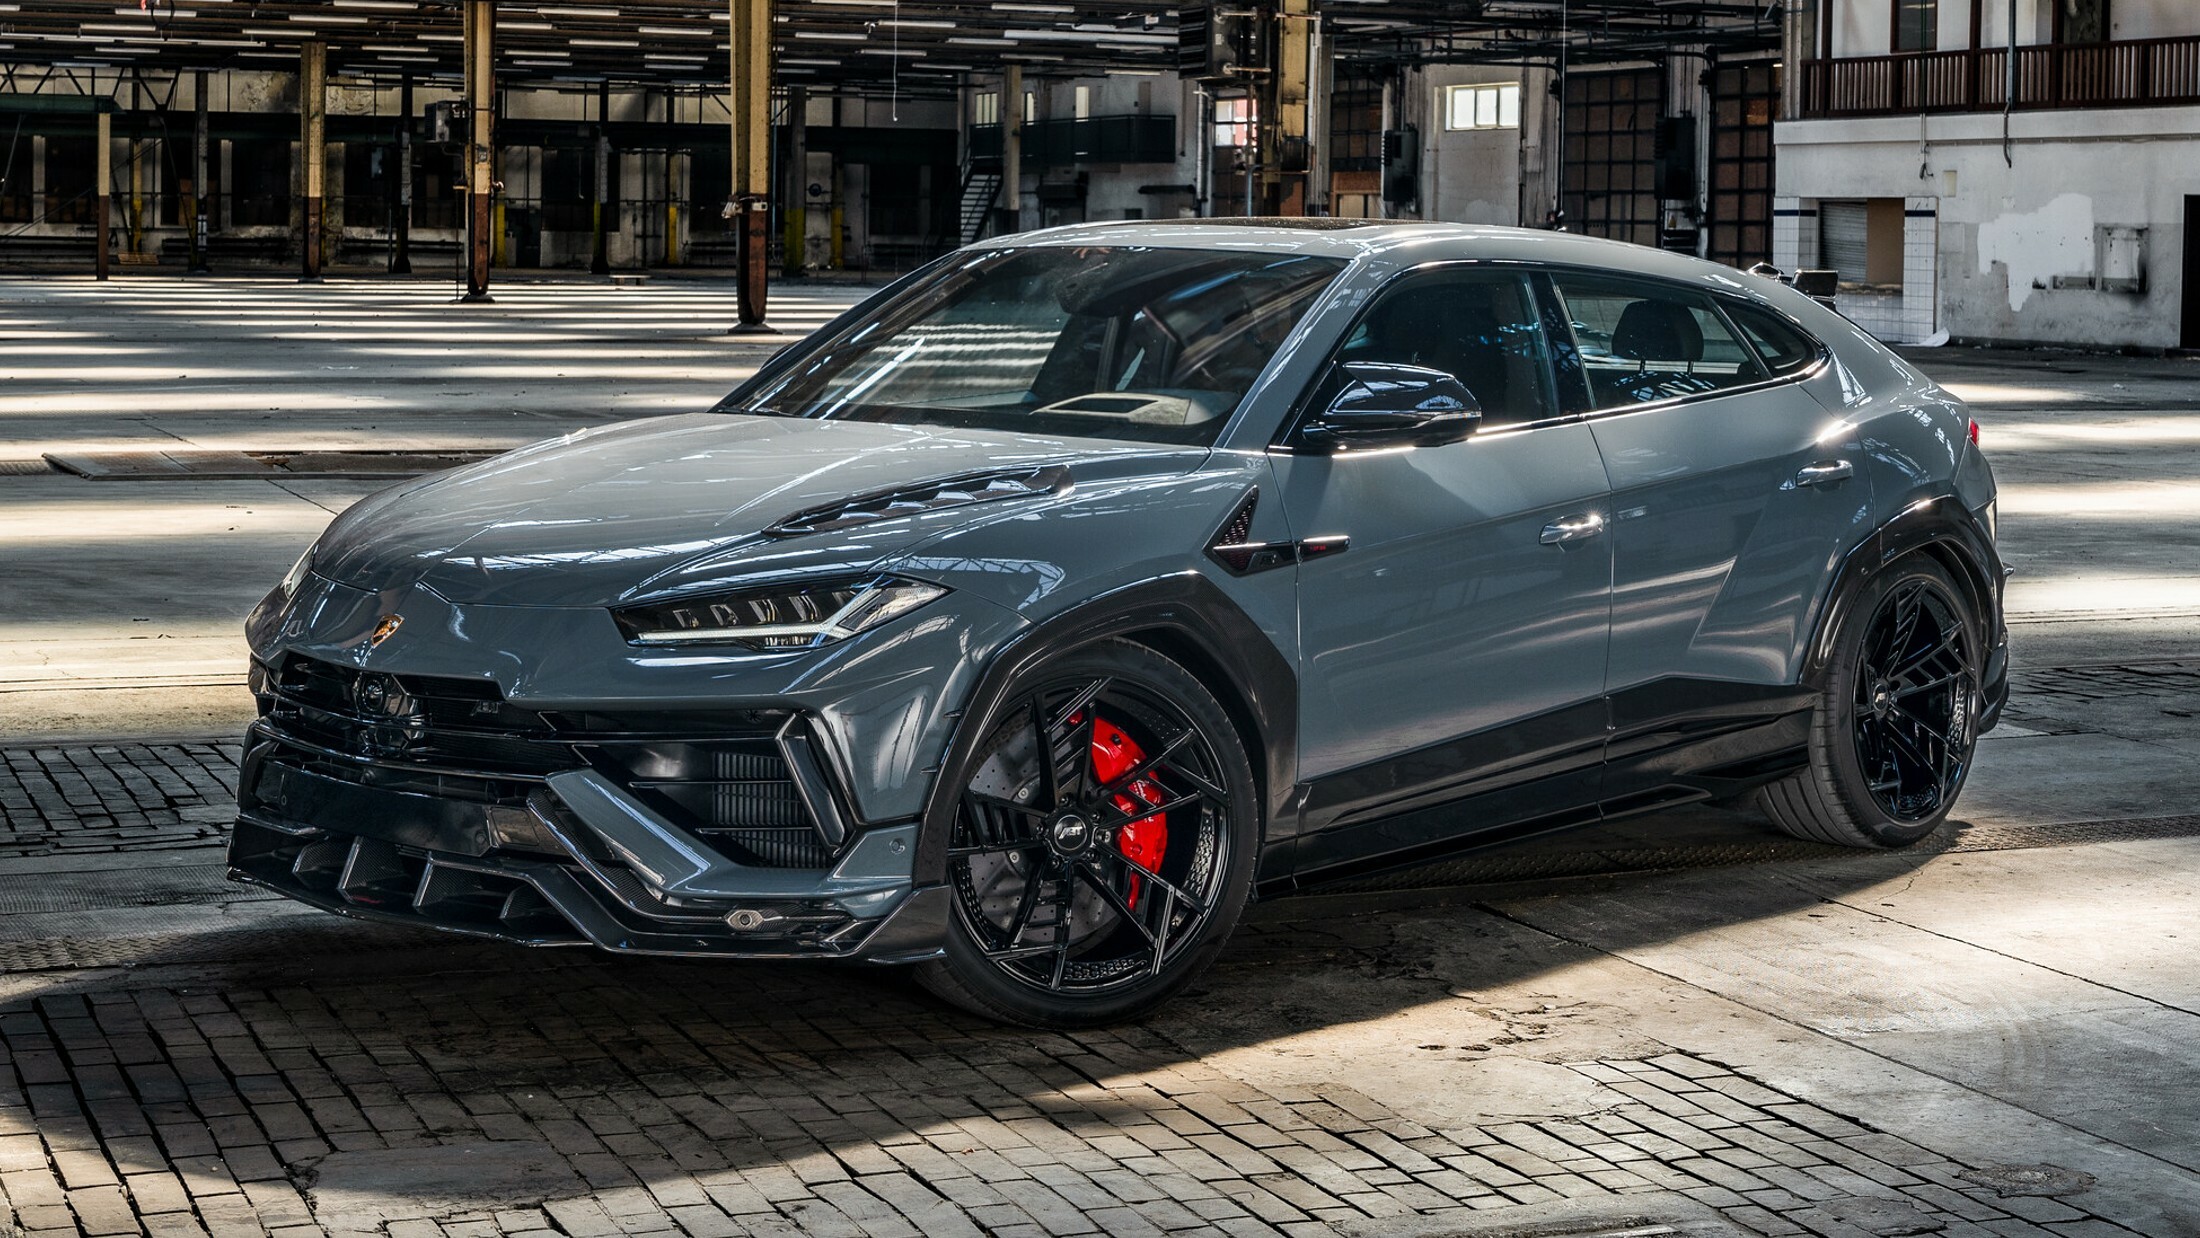 ABT's 799 HP Lamborghini Urus: For When You Need To Scat In A Hurry